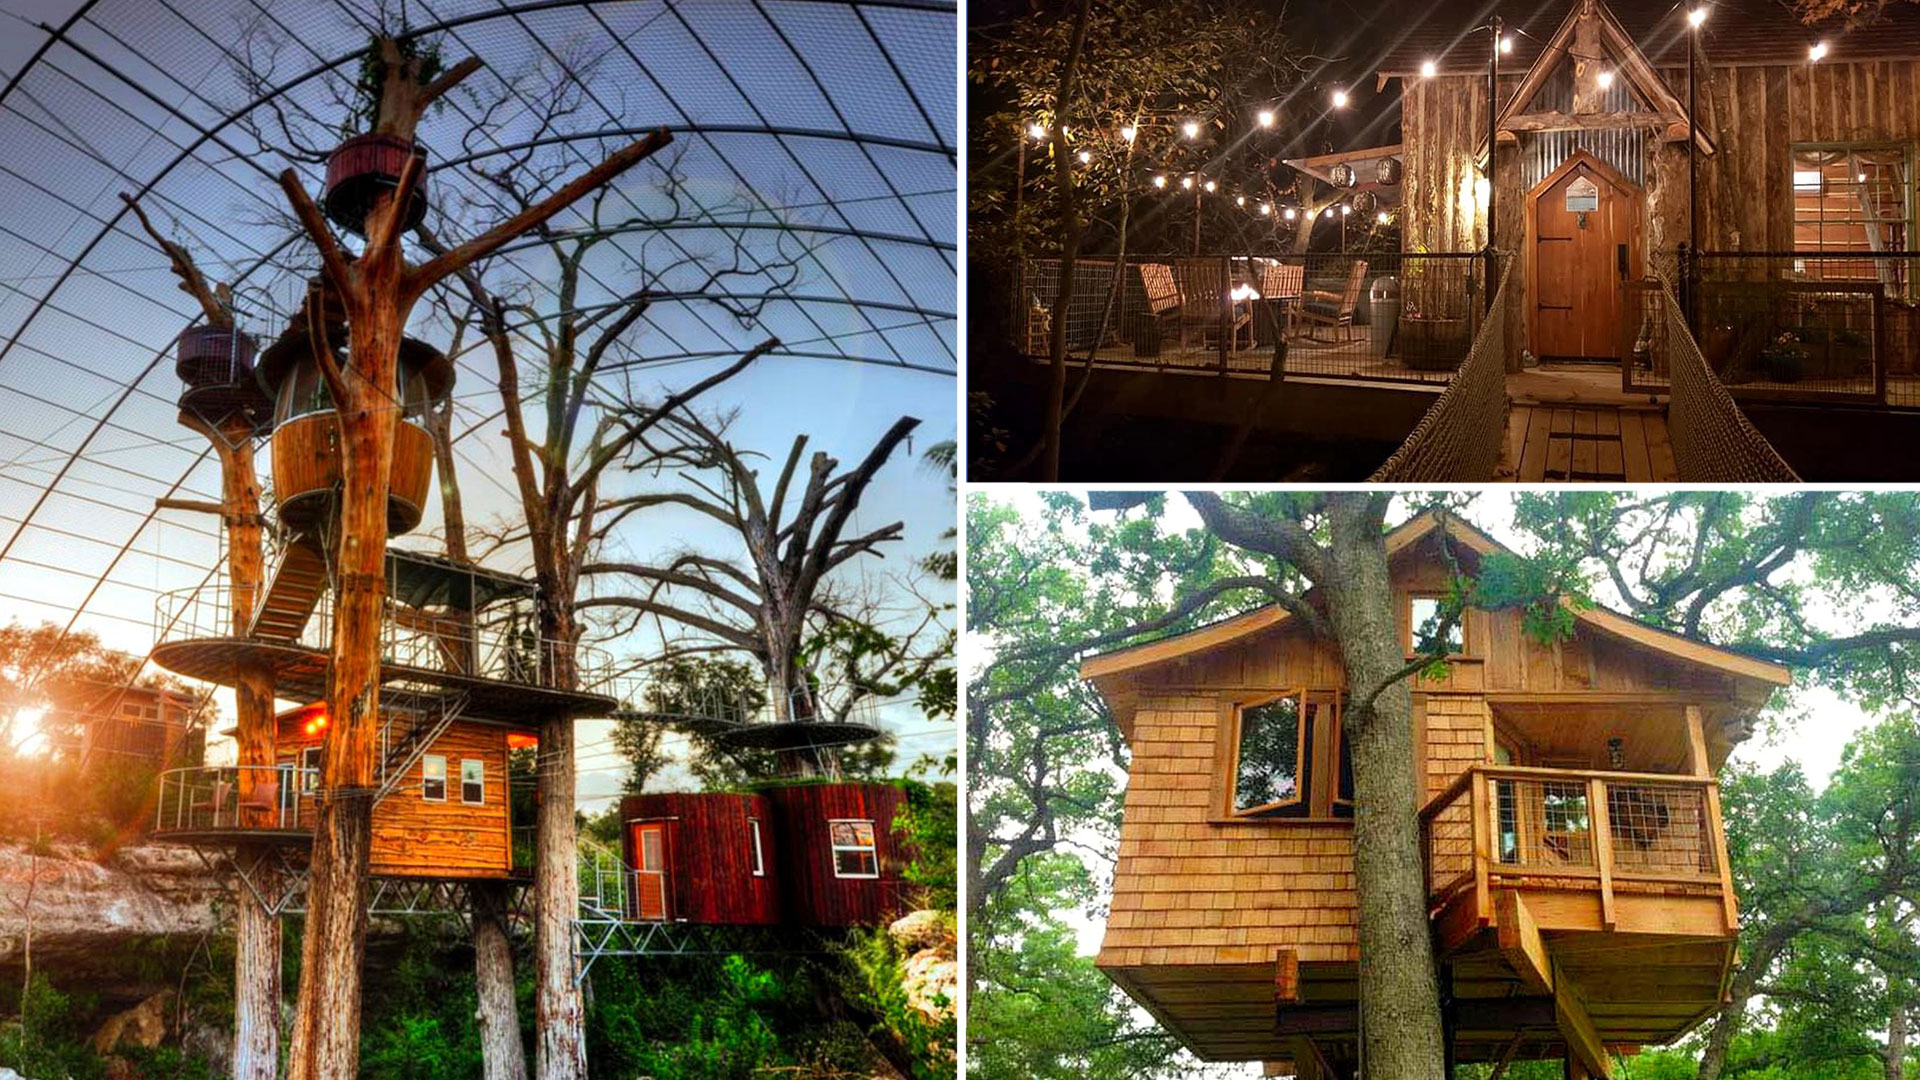 Texas treehouse rentals can be unique vacation experience